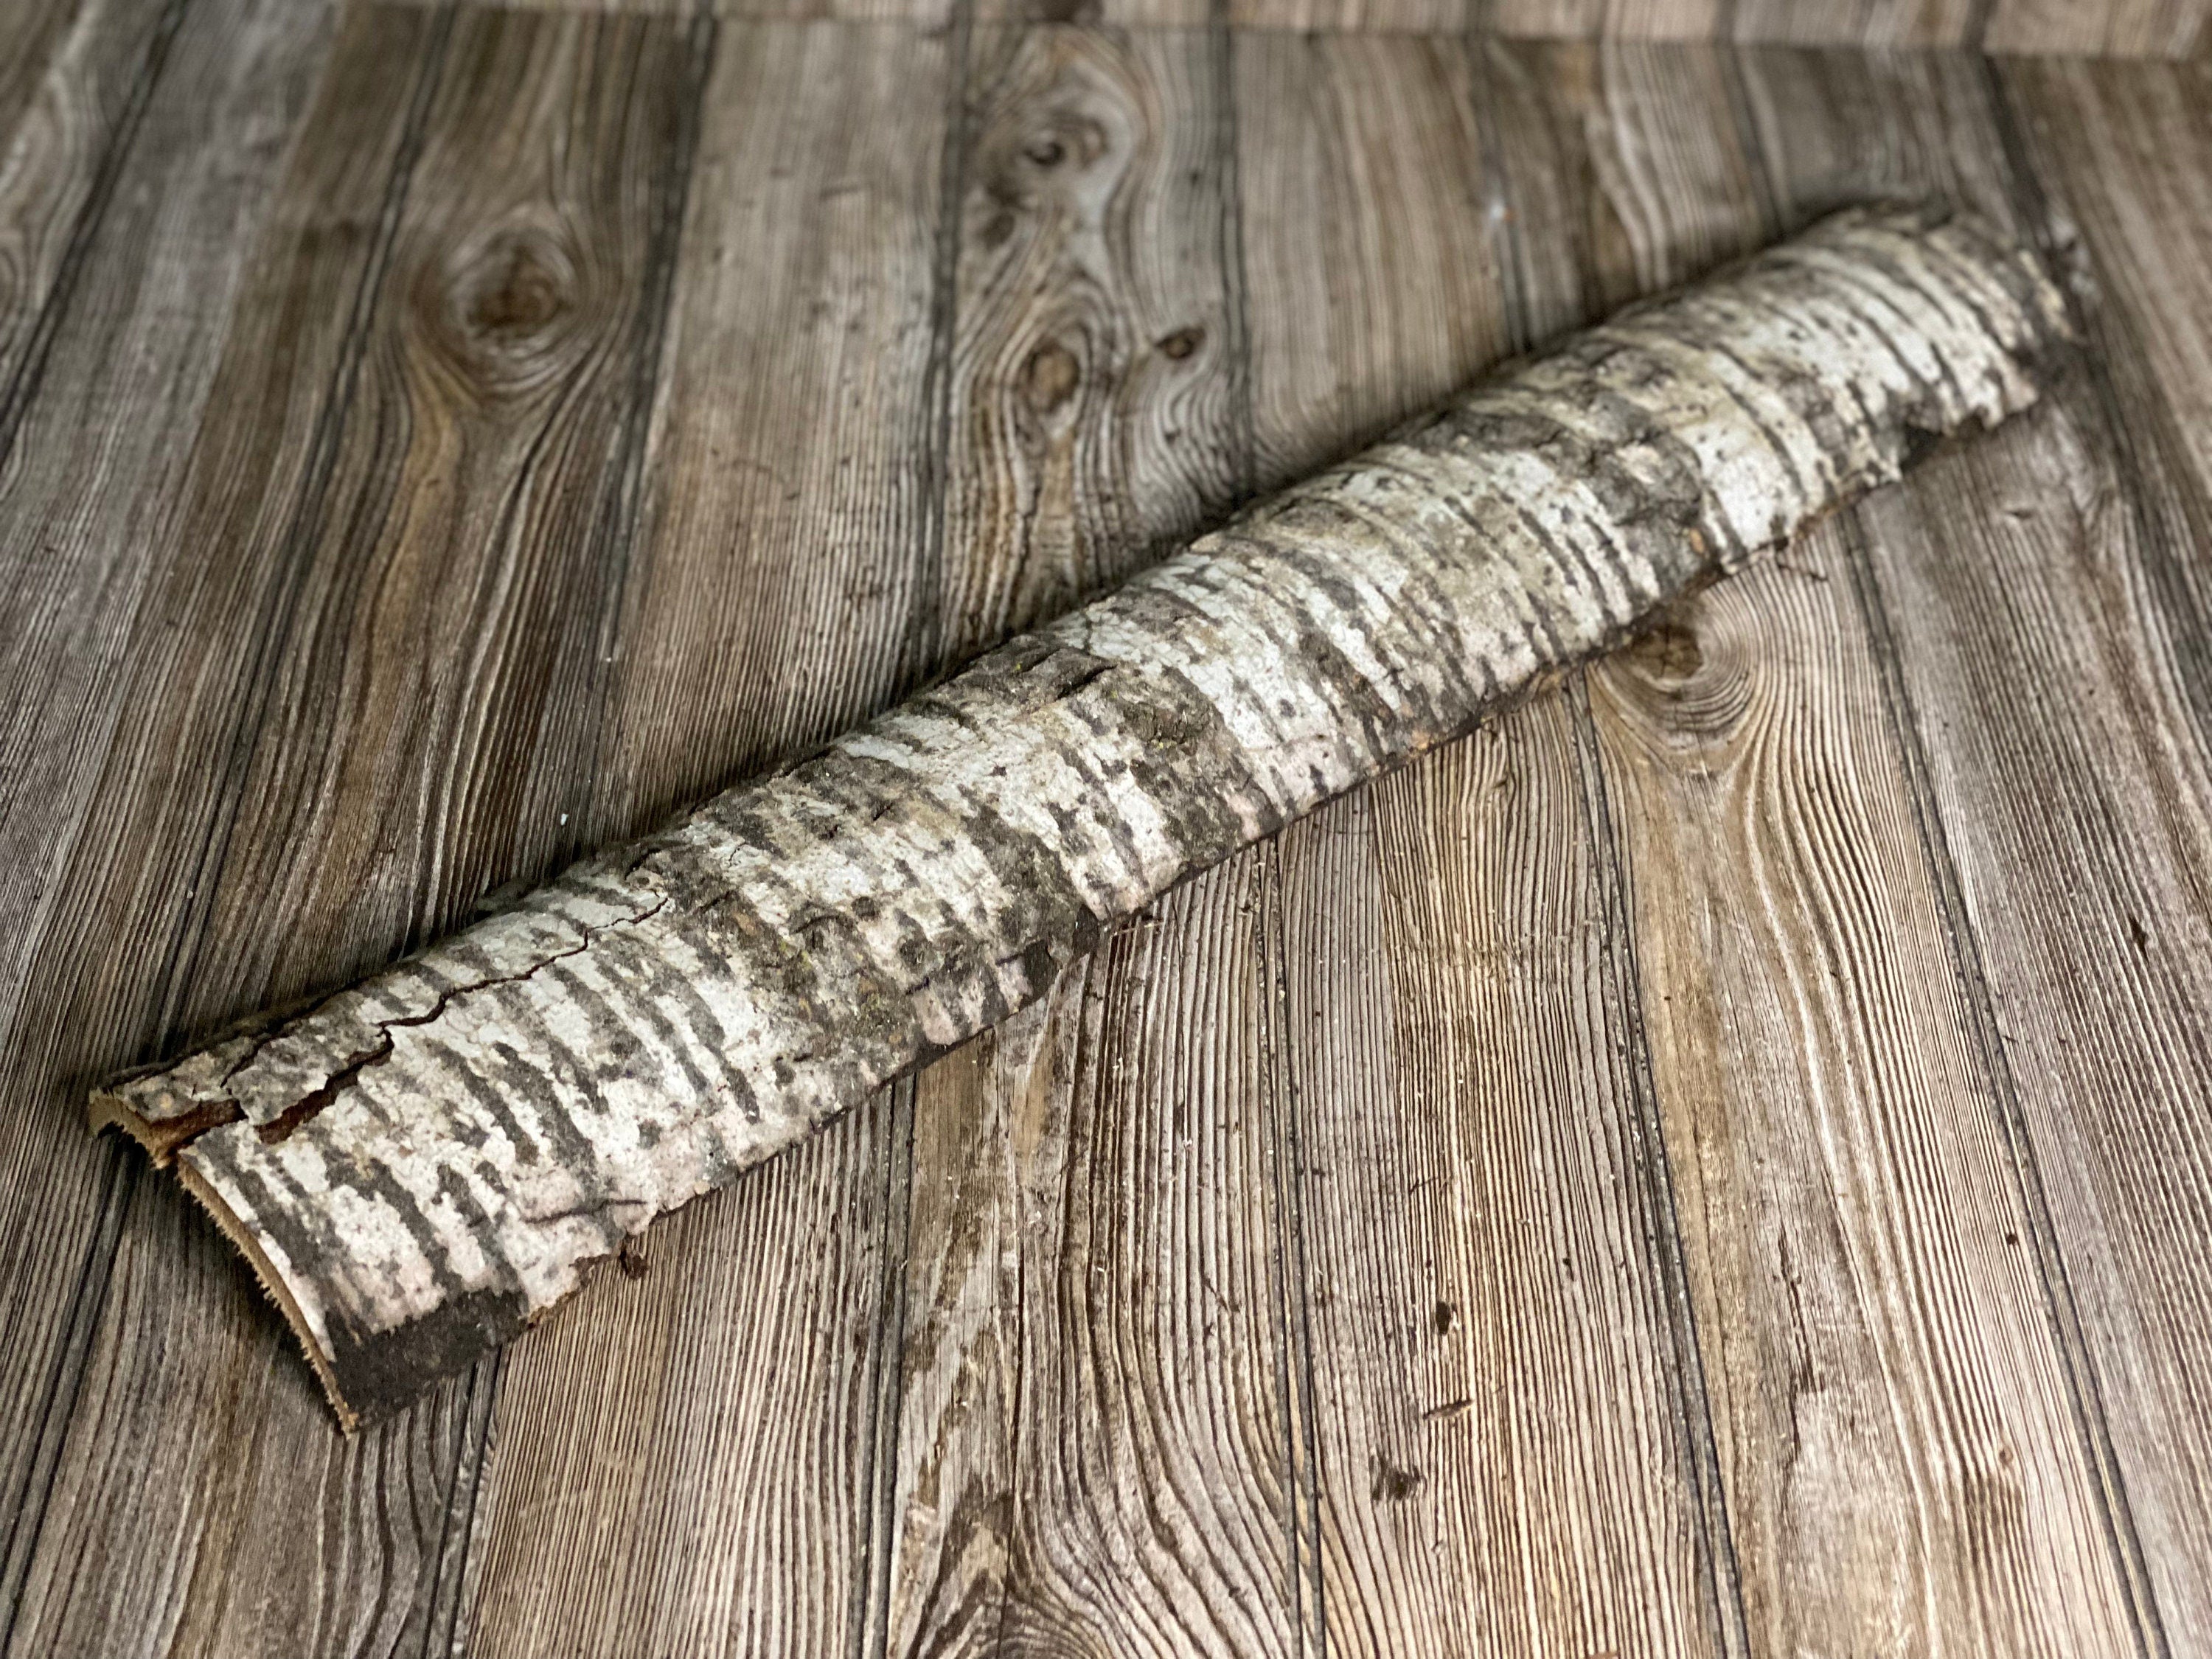 Long Aspen Lizard Tunnel, Approximately 28 Inches Long by 5 Inches Wide and 2 Inches High